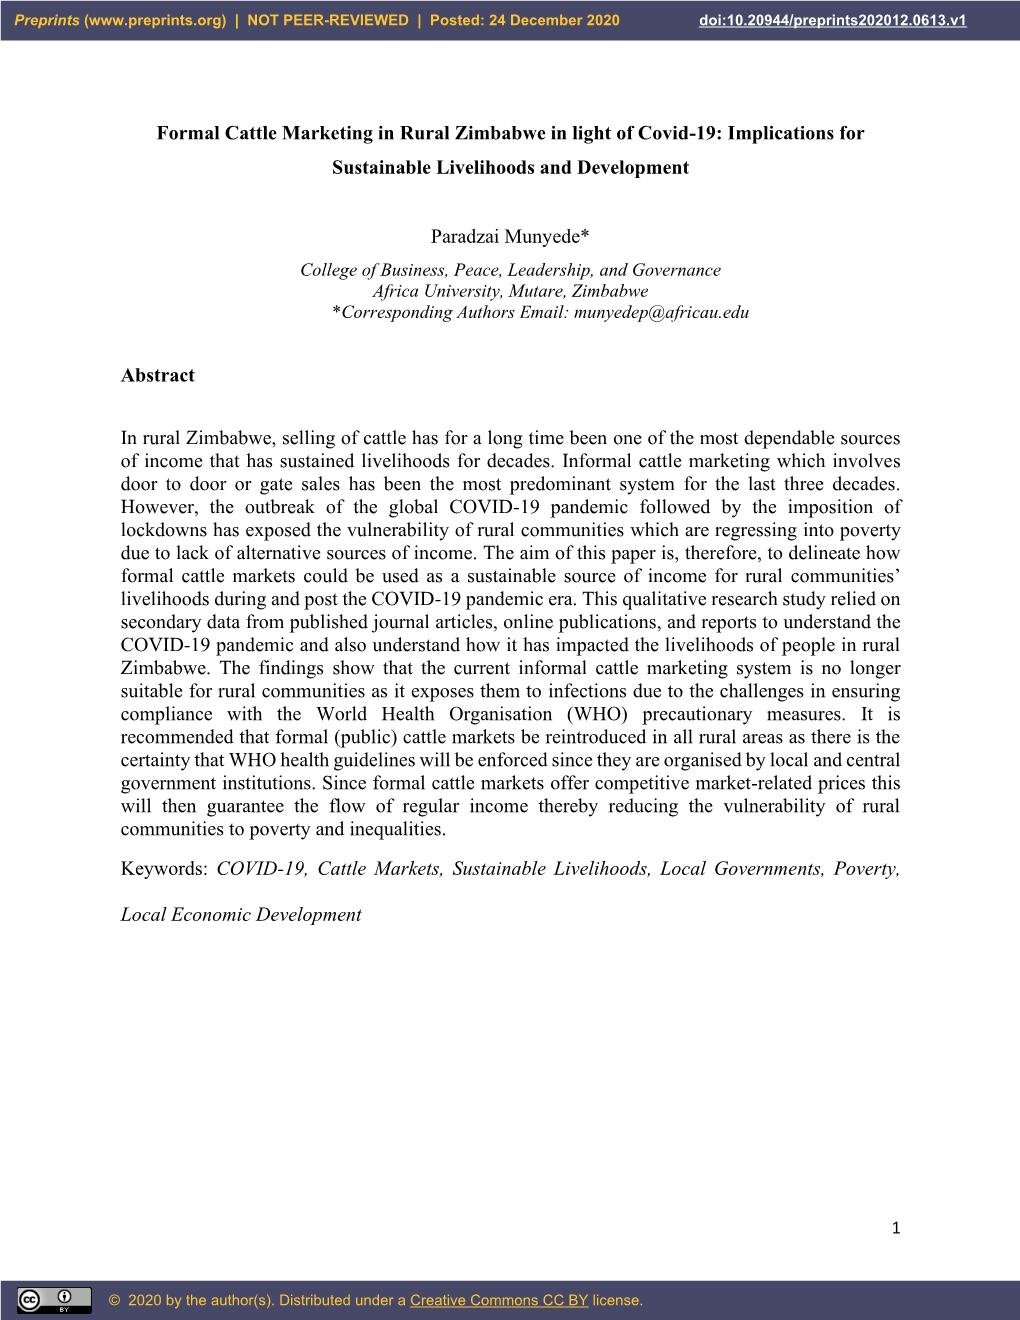 Formal Cattle Marketing in Rural Zimbabwe in Light of Covid-19: Implications for Sustainable Livelihoods and Development